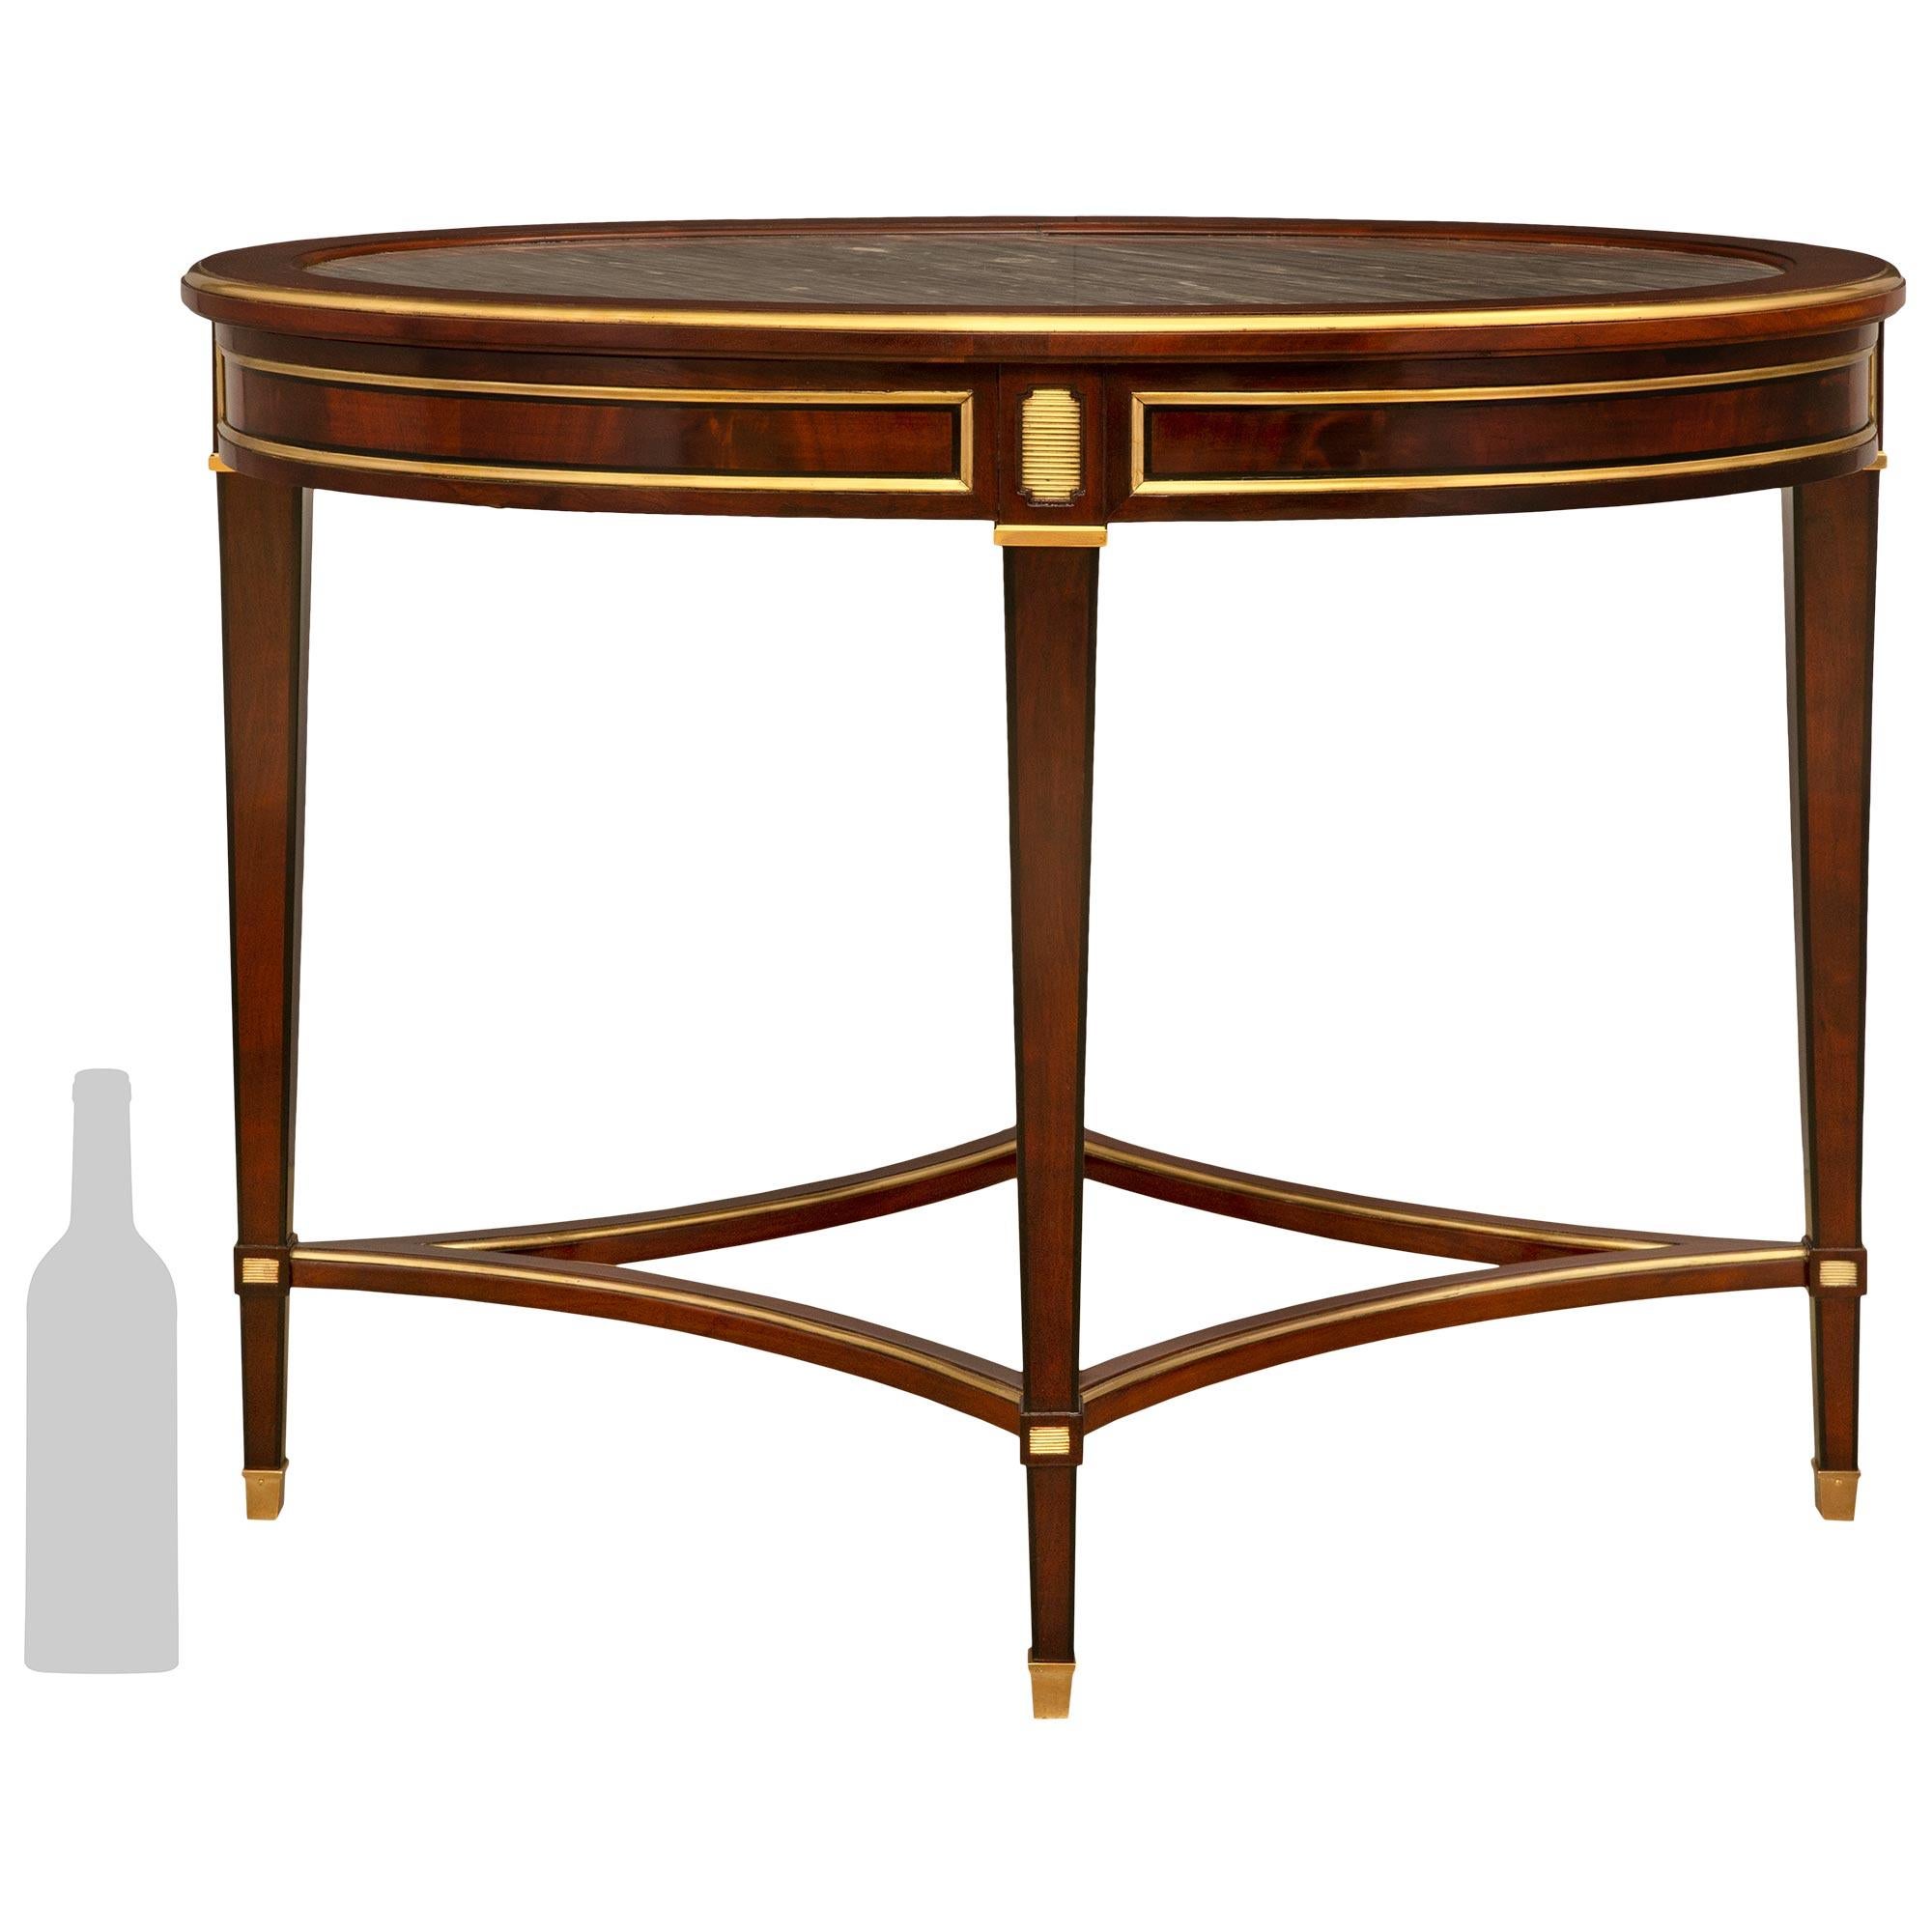 A handsome Continental 19th century Directoire st. Mahogany, ebonized Fruitwood, Brass, Ormolu and Gris St. Anne marble side/center table. The table is raised by four square tapered legs in Mahogany with ebonized Fruitwood bands at the four corners.